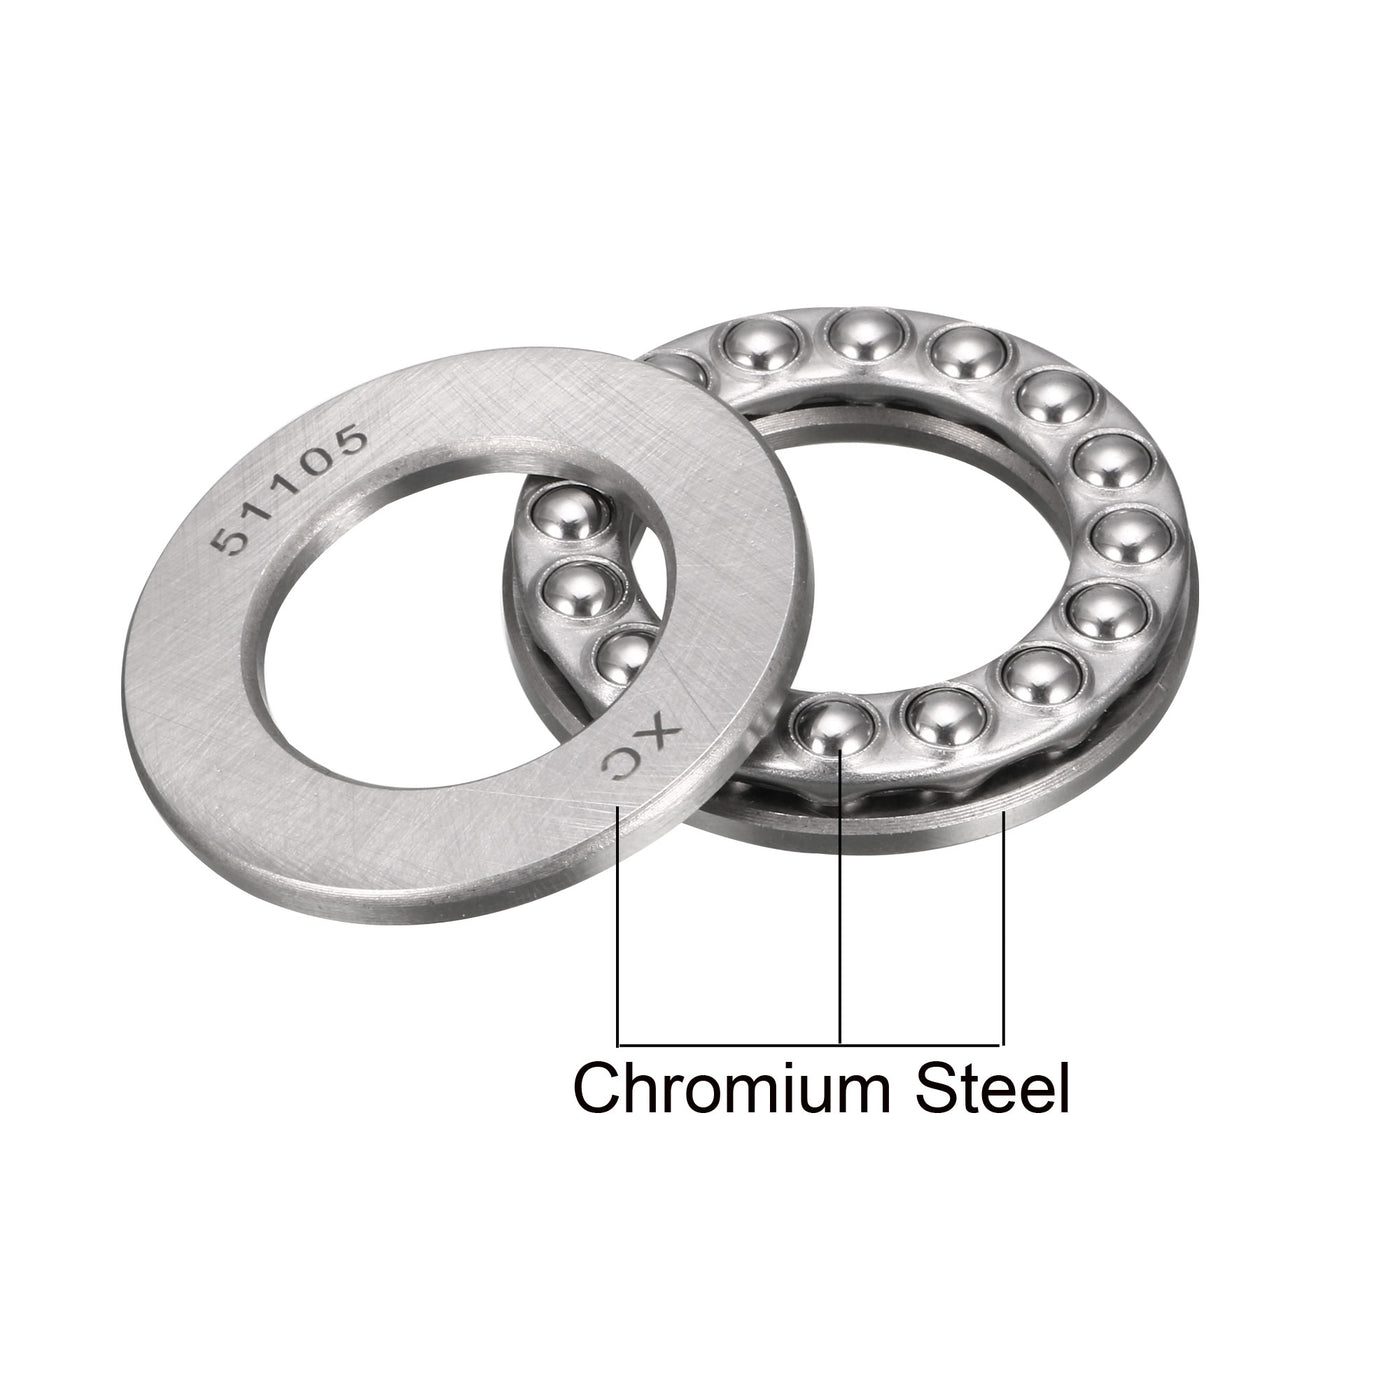 uxcell Uxcell 51105 Miniature Thrust Ball Bearing 25x42x11mm Chrome Steel with Washer 4pcs